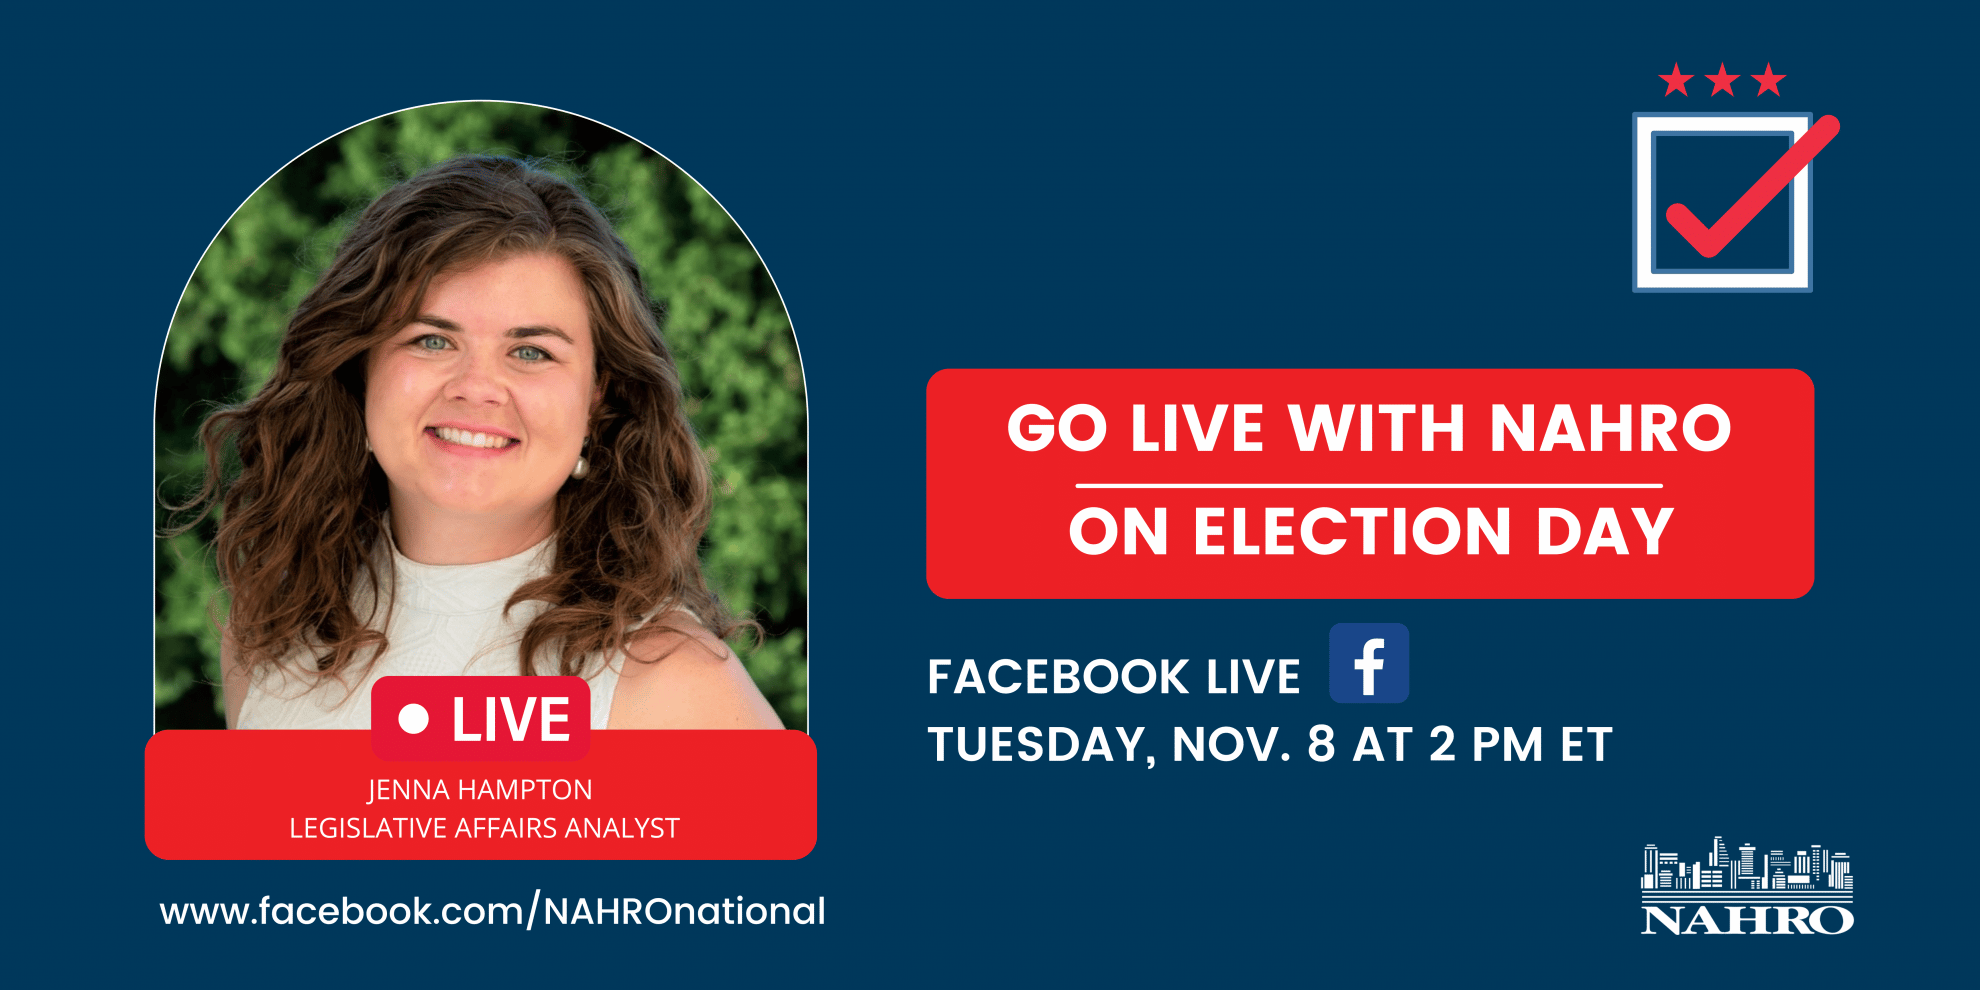 Go Live with NAHRO on Election Day! The National Association of